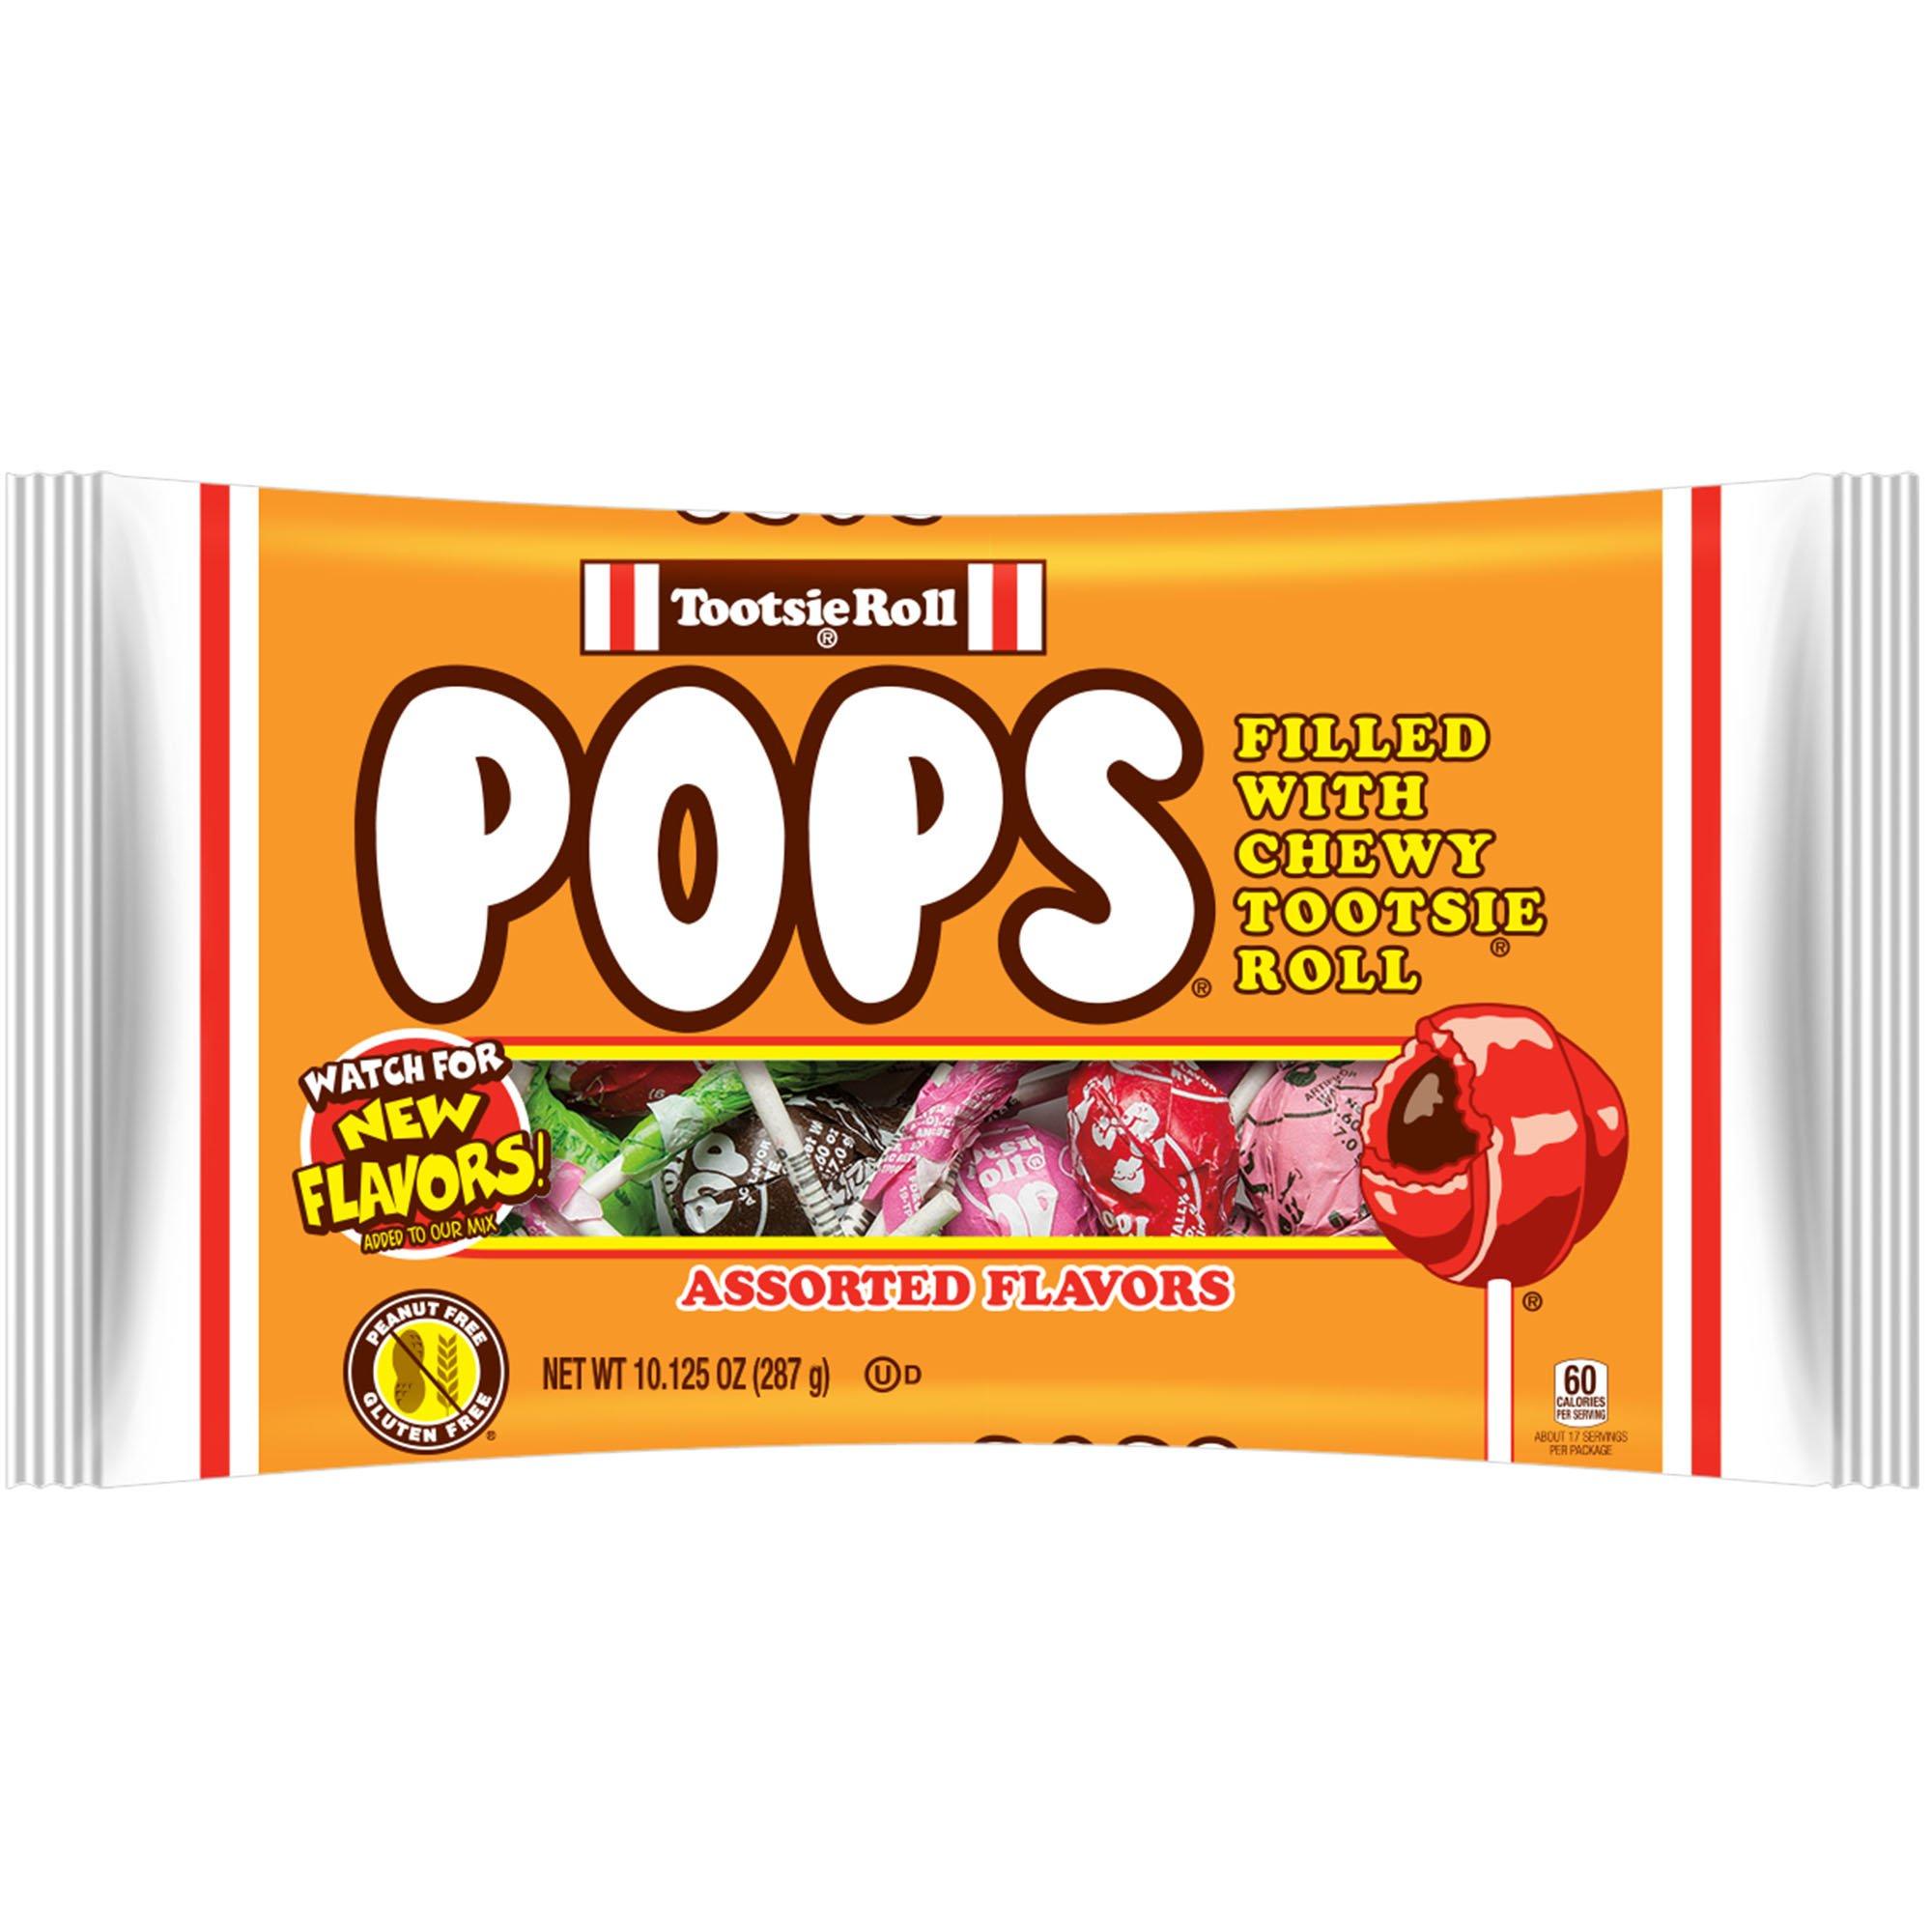 Tootsie Roll Pops Variety Bag, 24ct